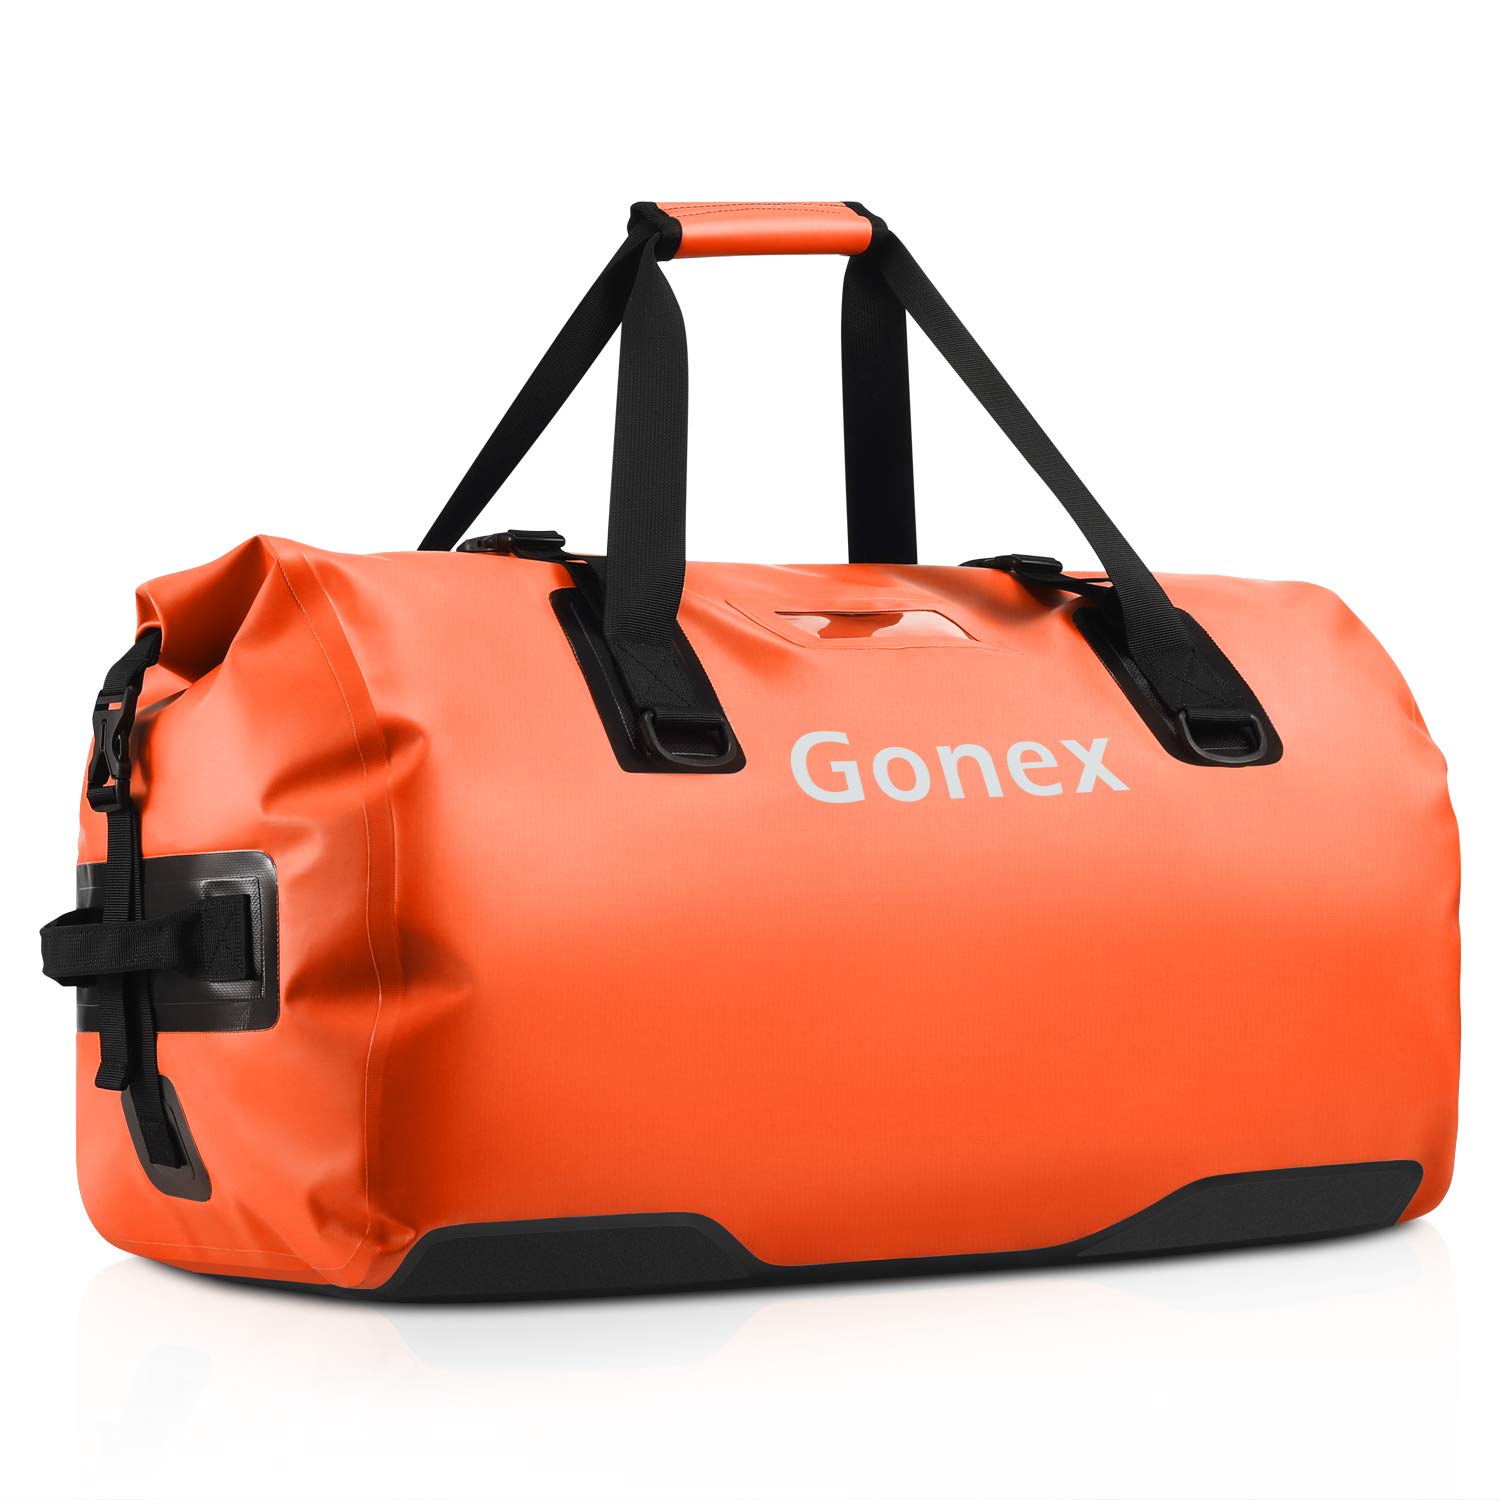  Gonex 60L Extra Large Waterproof Duffle Travel Dry Duffel Bag  Heavy Duty Bag with Durable Straps & Handles for Kayaking Paddleboarding  Boating Rafting Fishing Black : Sports & Outdoors